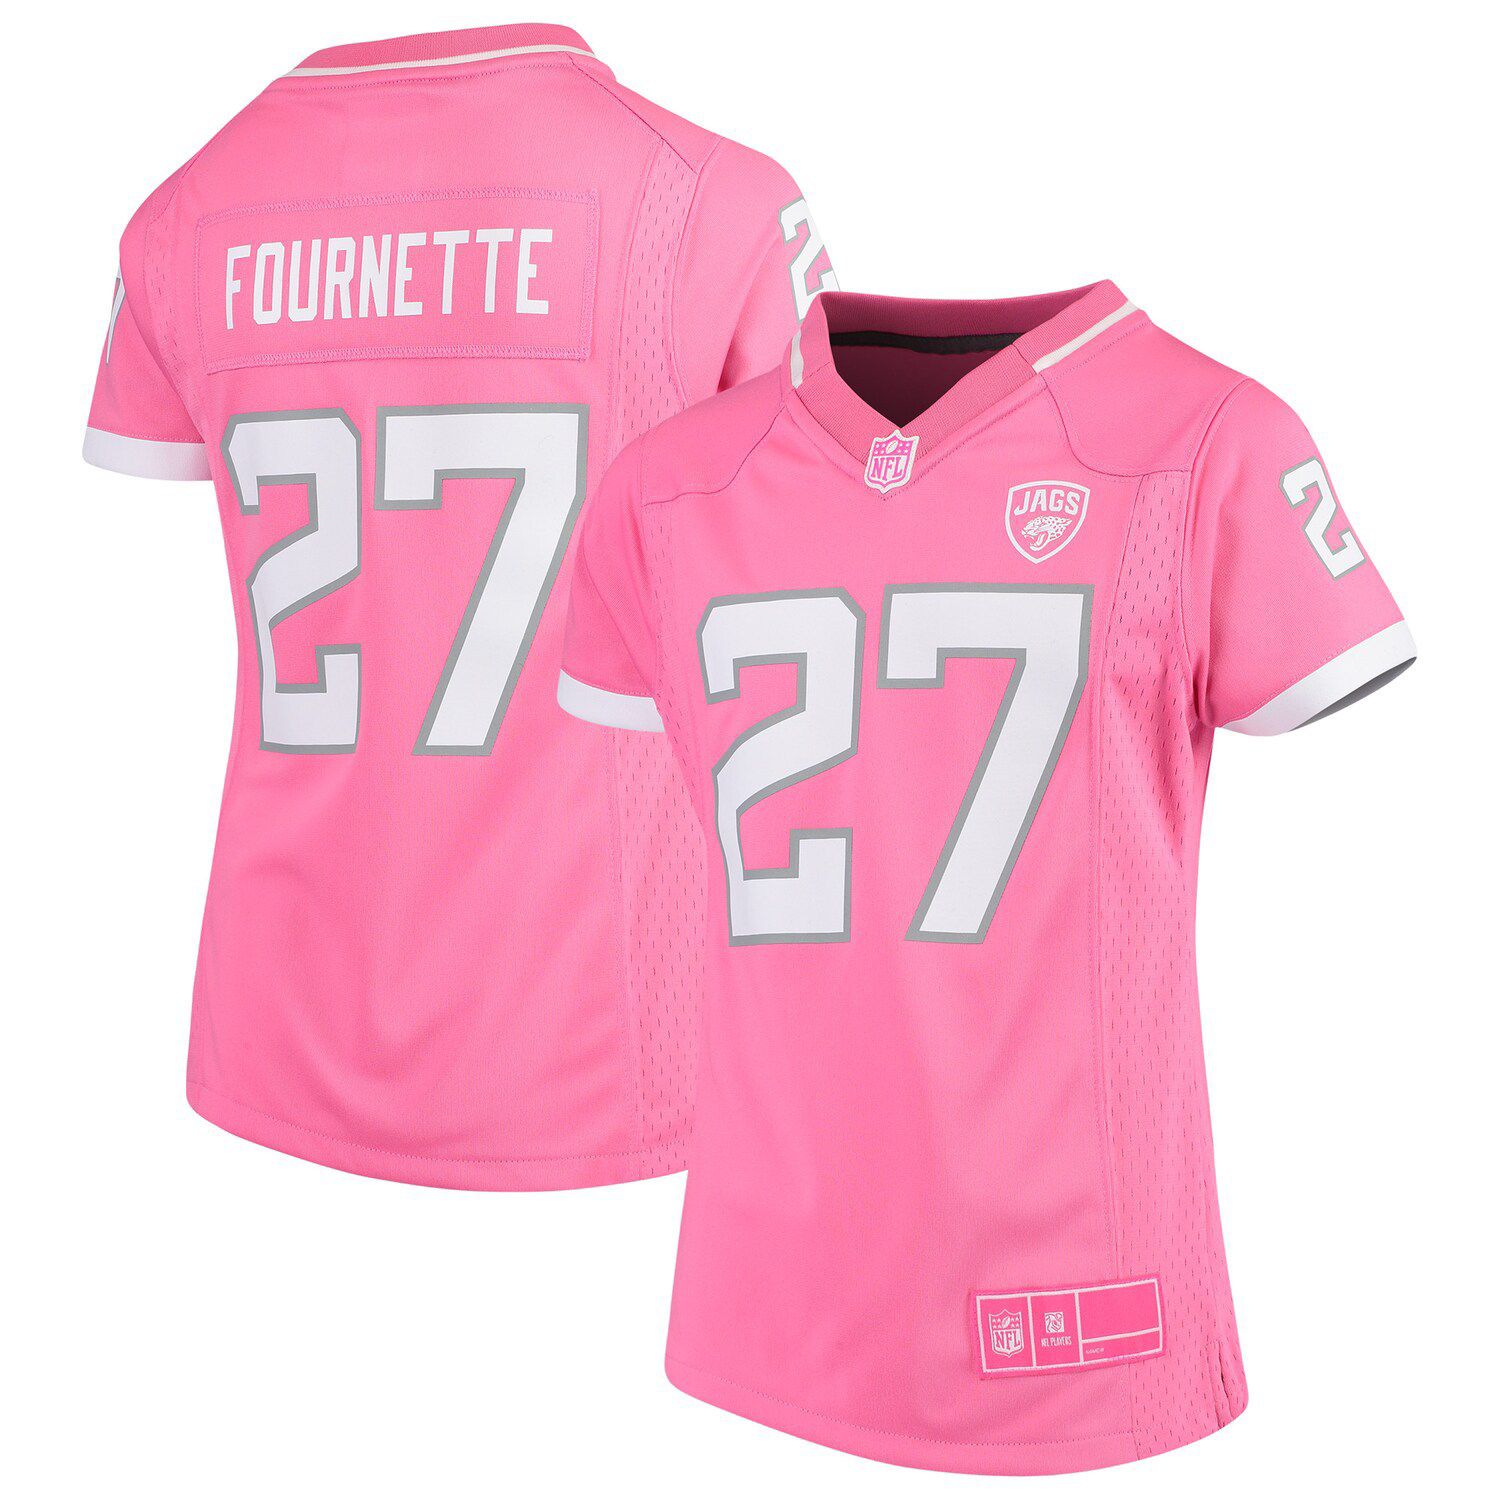 fournette youth jersey